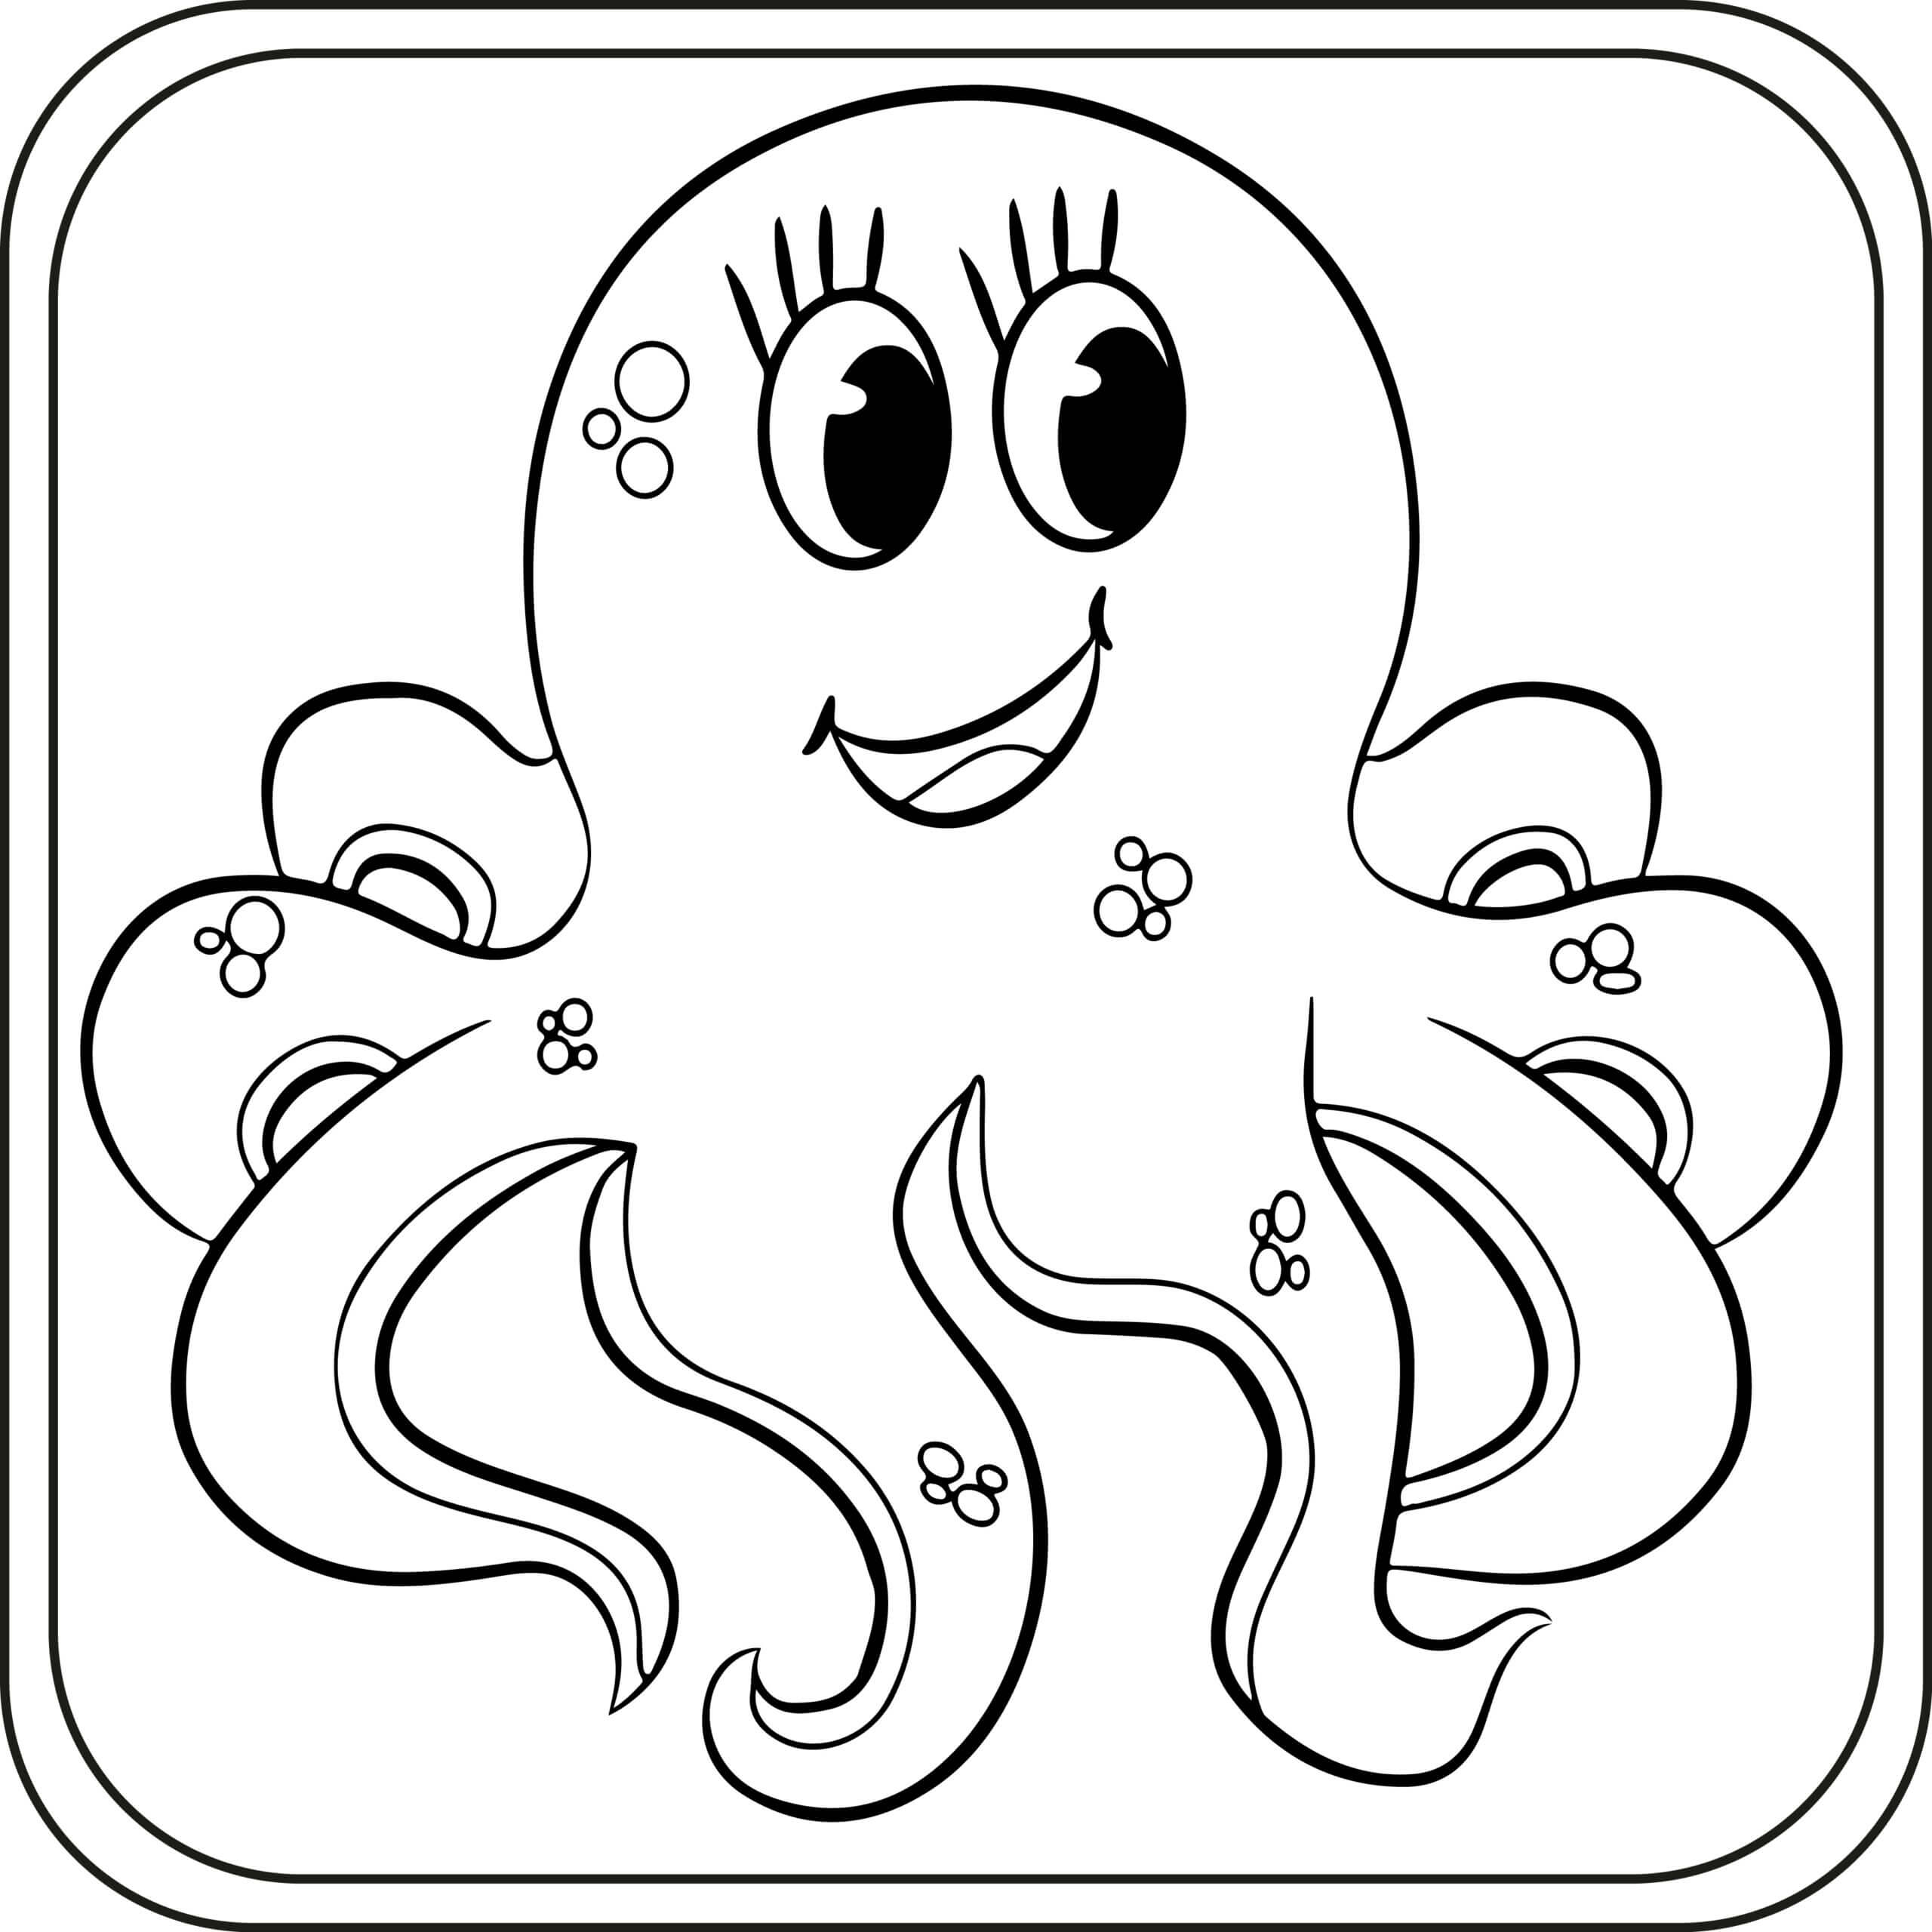 Nice Octopus coloring page - Download, Print or Color Online for Free